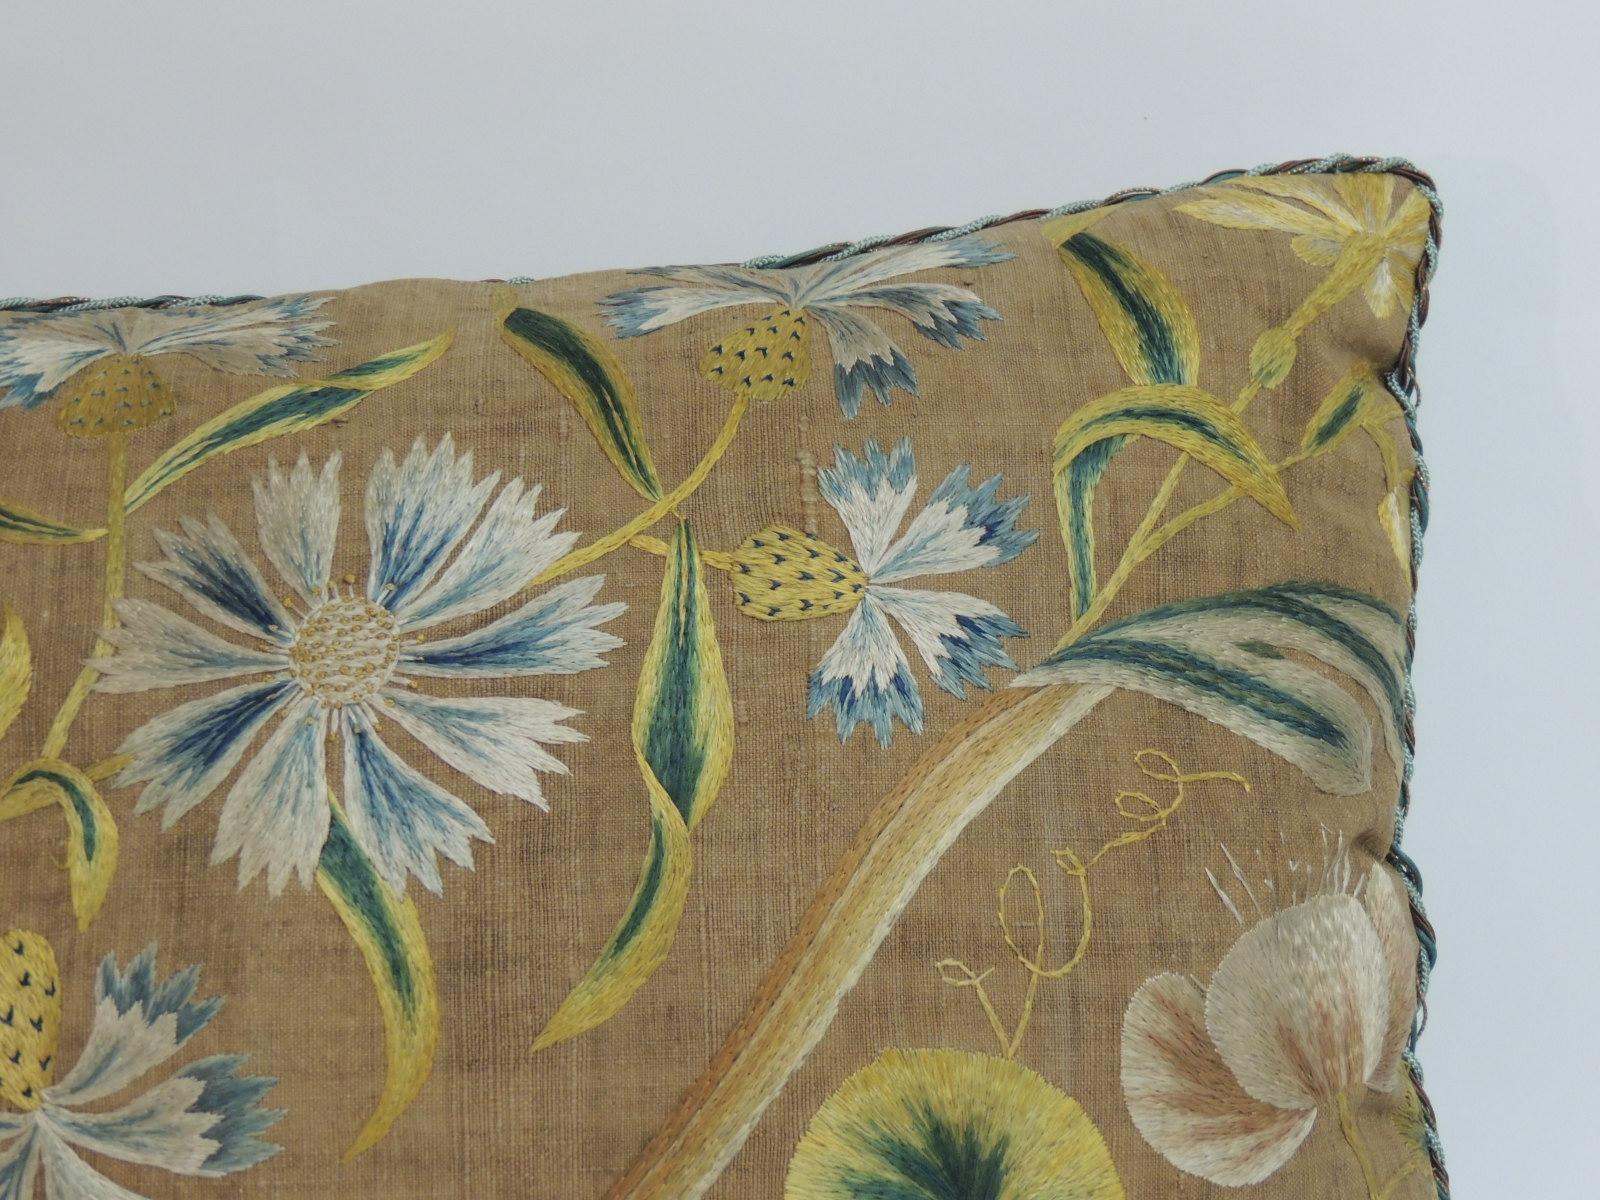 Antique Venetian floral embroidered large bolster decorative pillow. Italian floral silk floss thread embroidered on linen.
In shades of yellow, green, white, pink and blue. Silk green velvet backing and ATG decorative twisted trims all